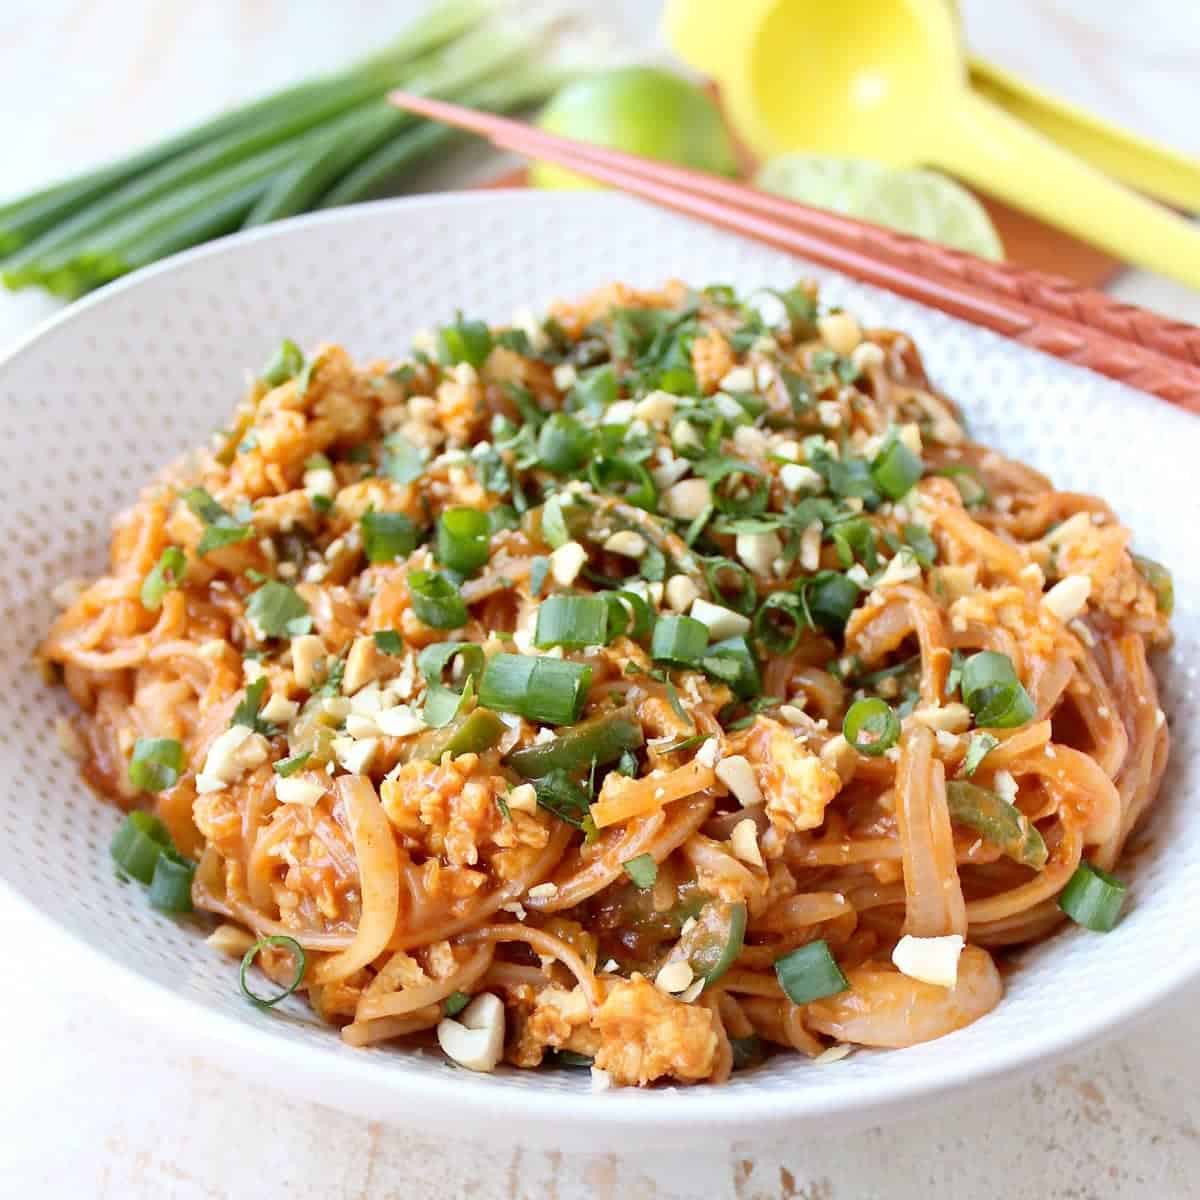 prepared pad thai in bowl with chopsticks on the side